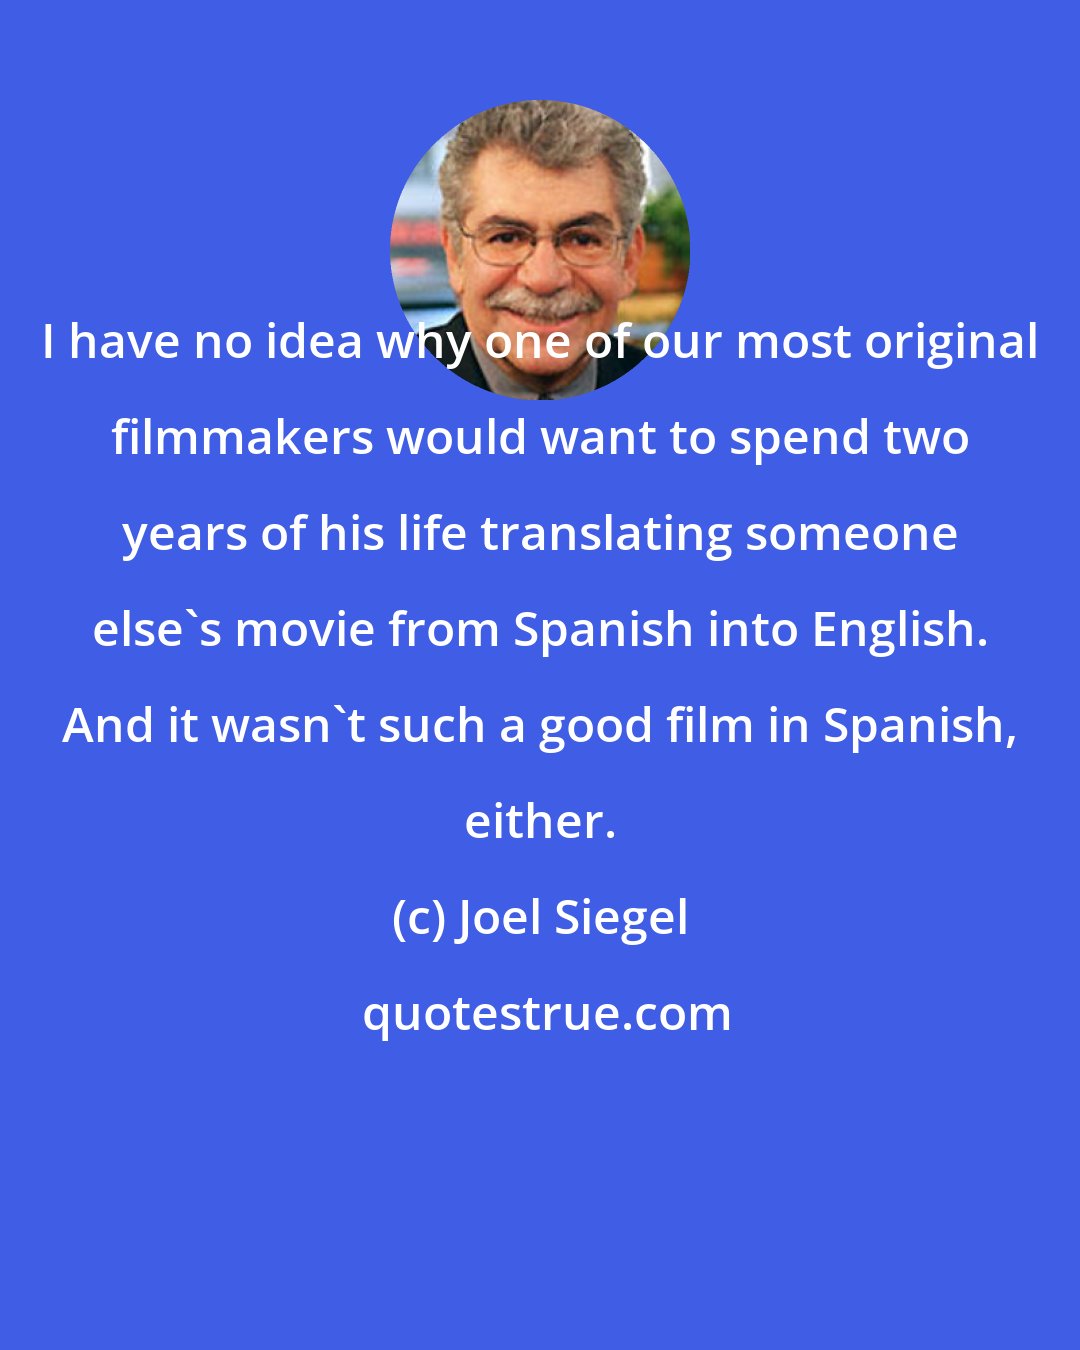 Joel Siegel: I have no idea why one of our most original filmmakers would want to spend two years of his life translating someone else's movie from Spanish into English. And it wasn't such a good film in Spanish, either.